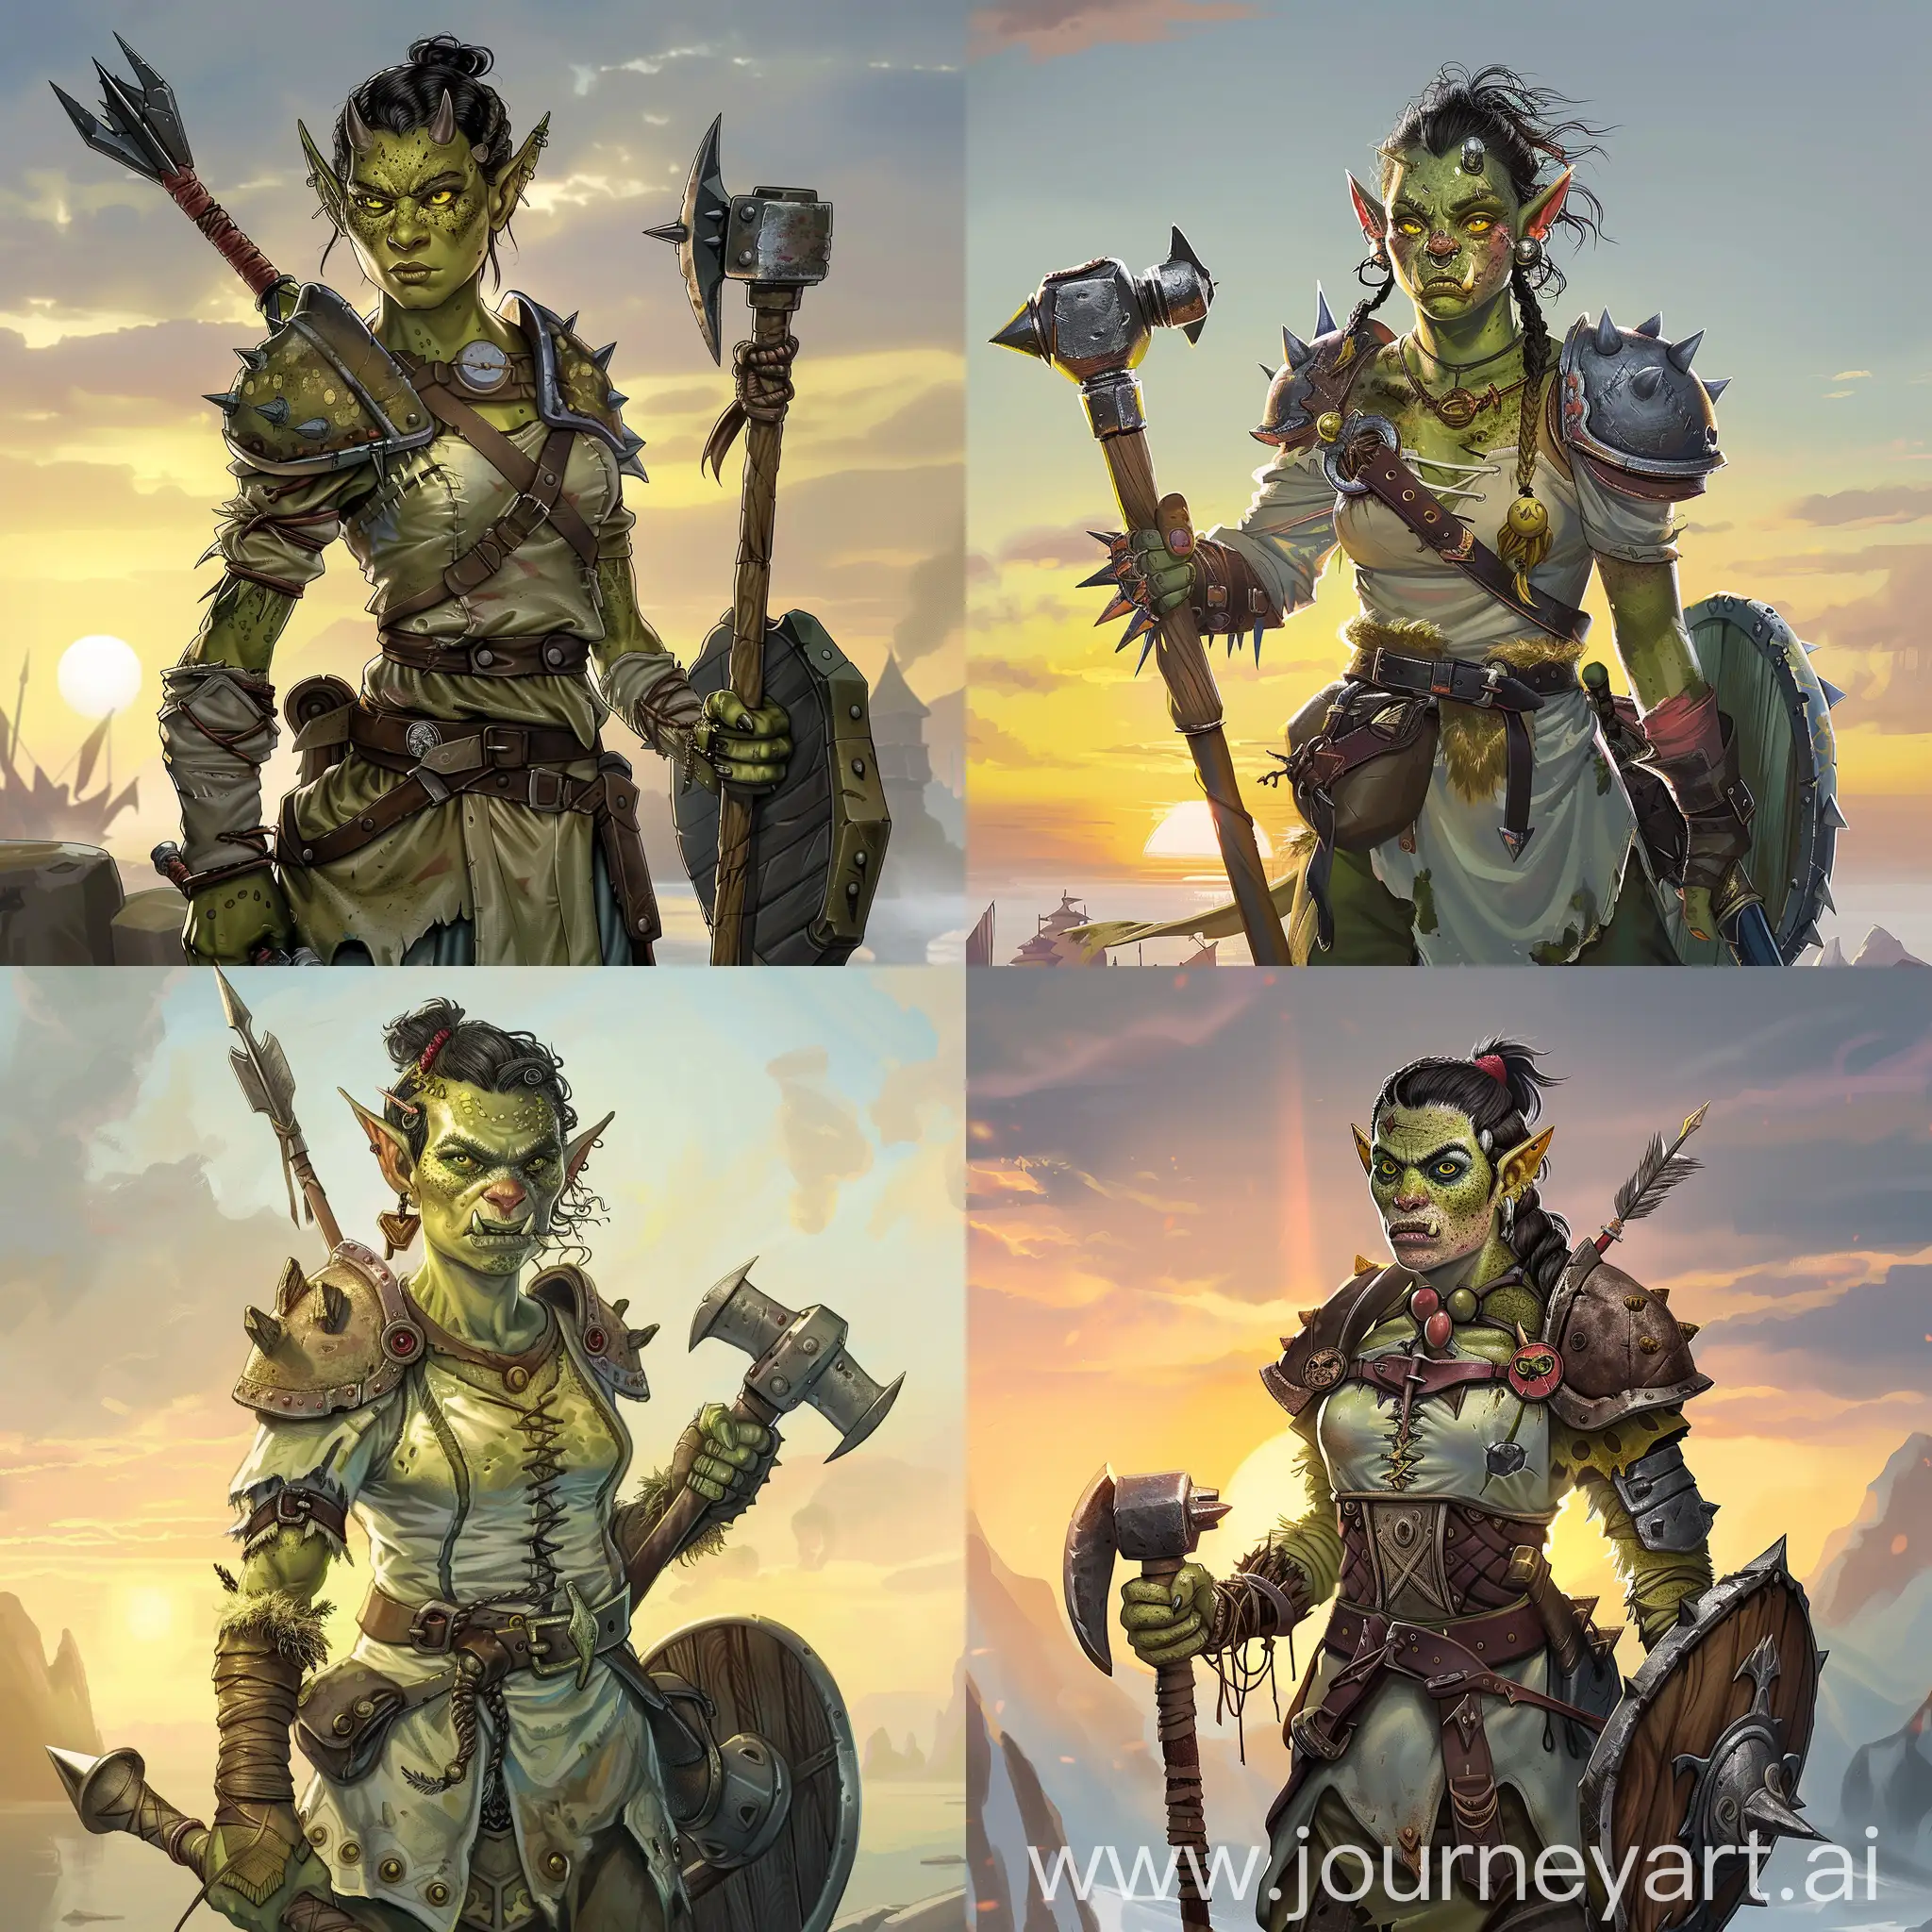 Female-Orc-Warrior-with-Mace-and-Shield-in-Medieval-Setting